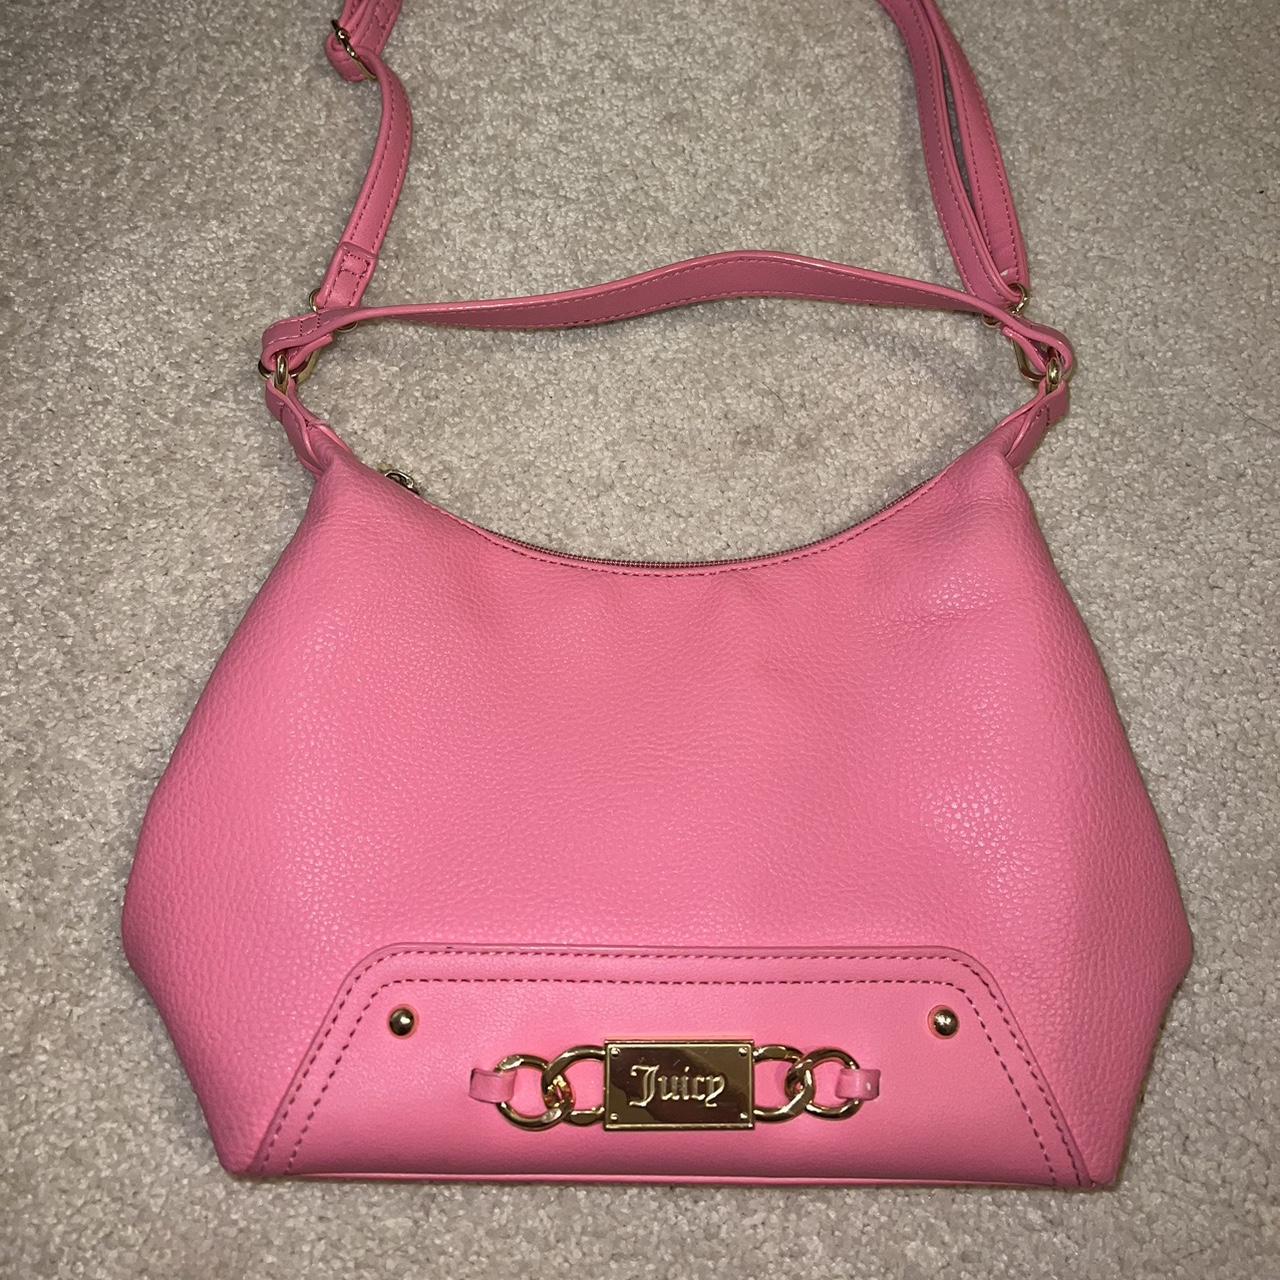 Juicy Couture | Bags | Juicy Couture Pink Purse | Poshmark